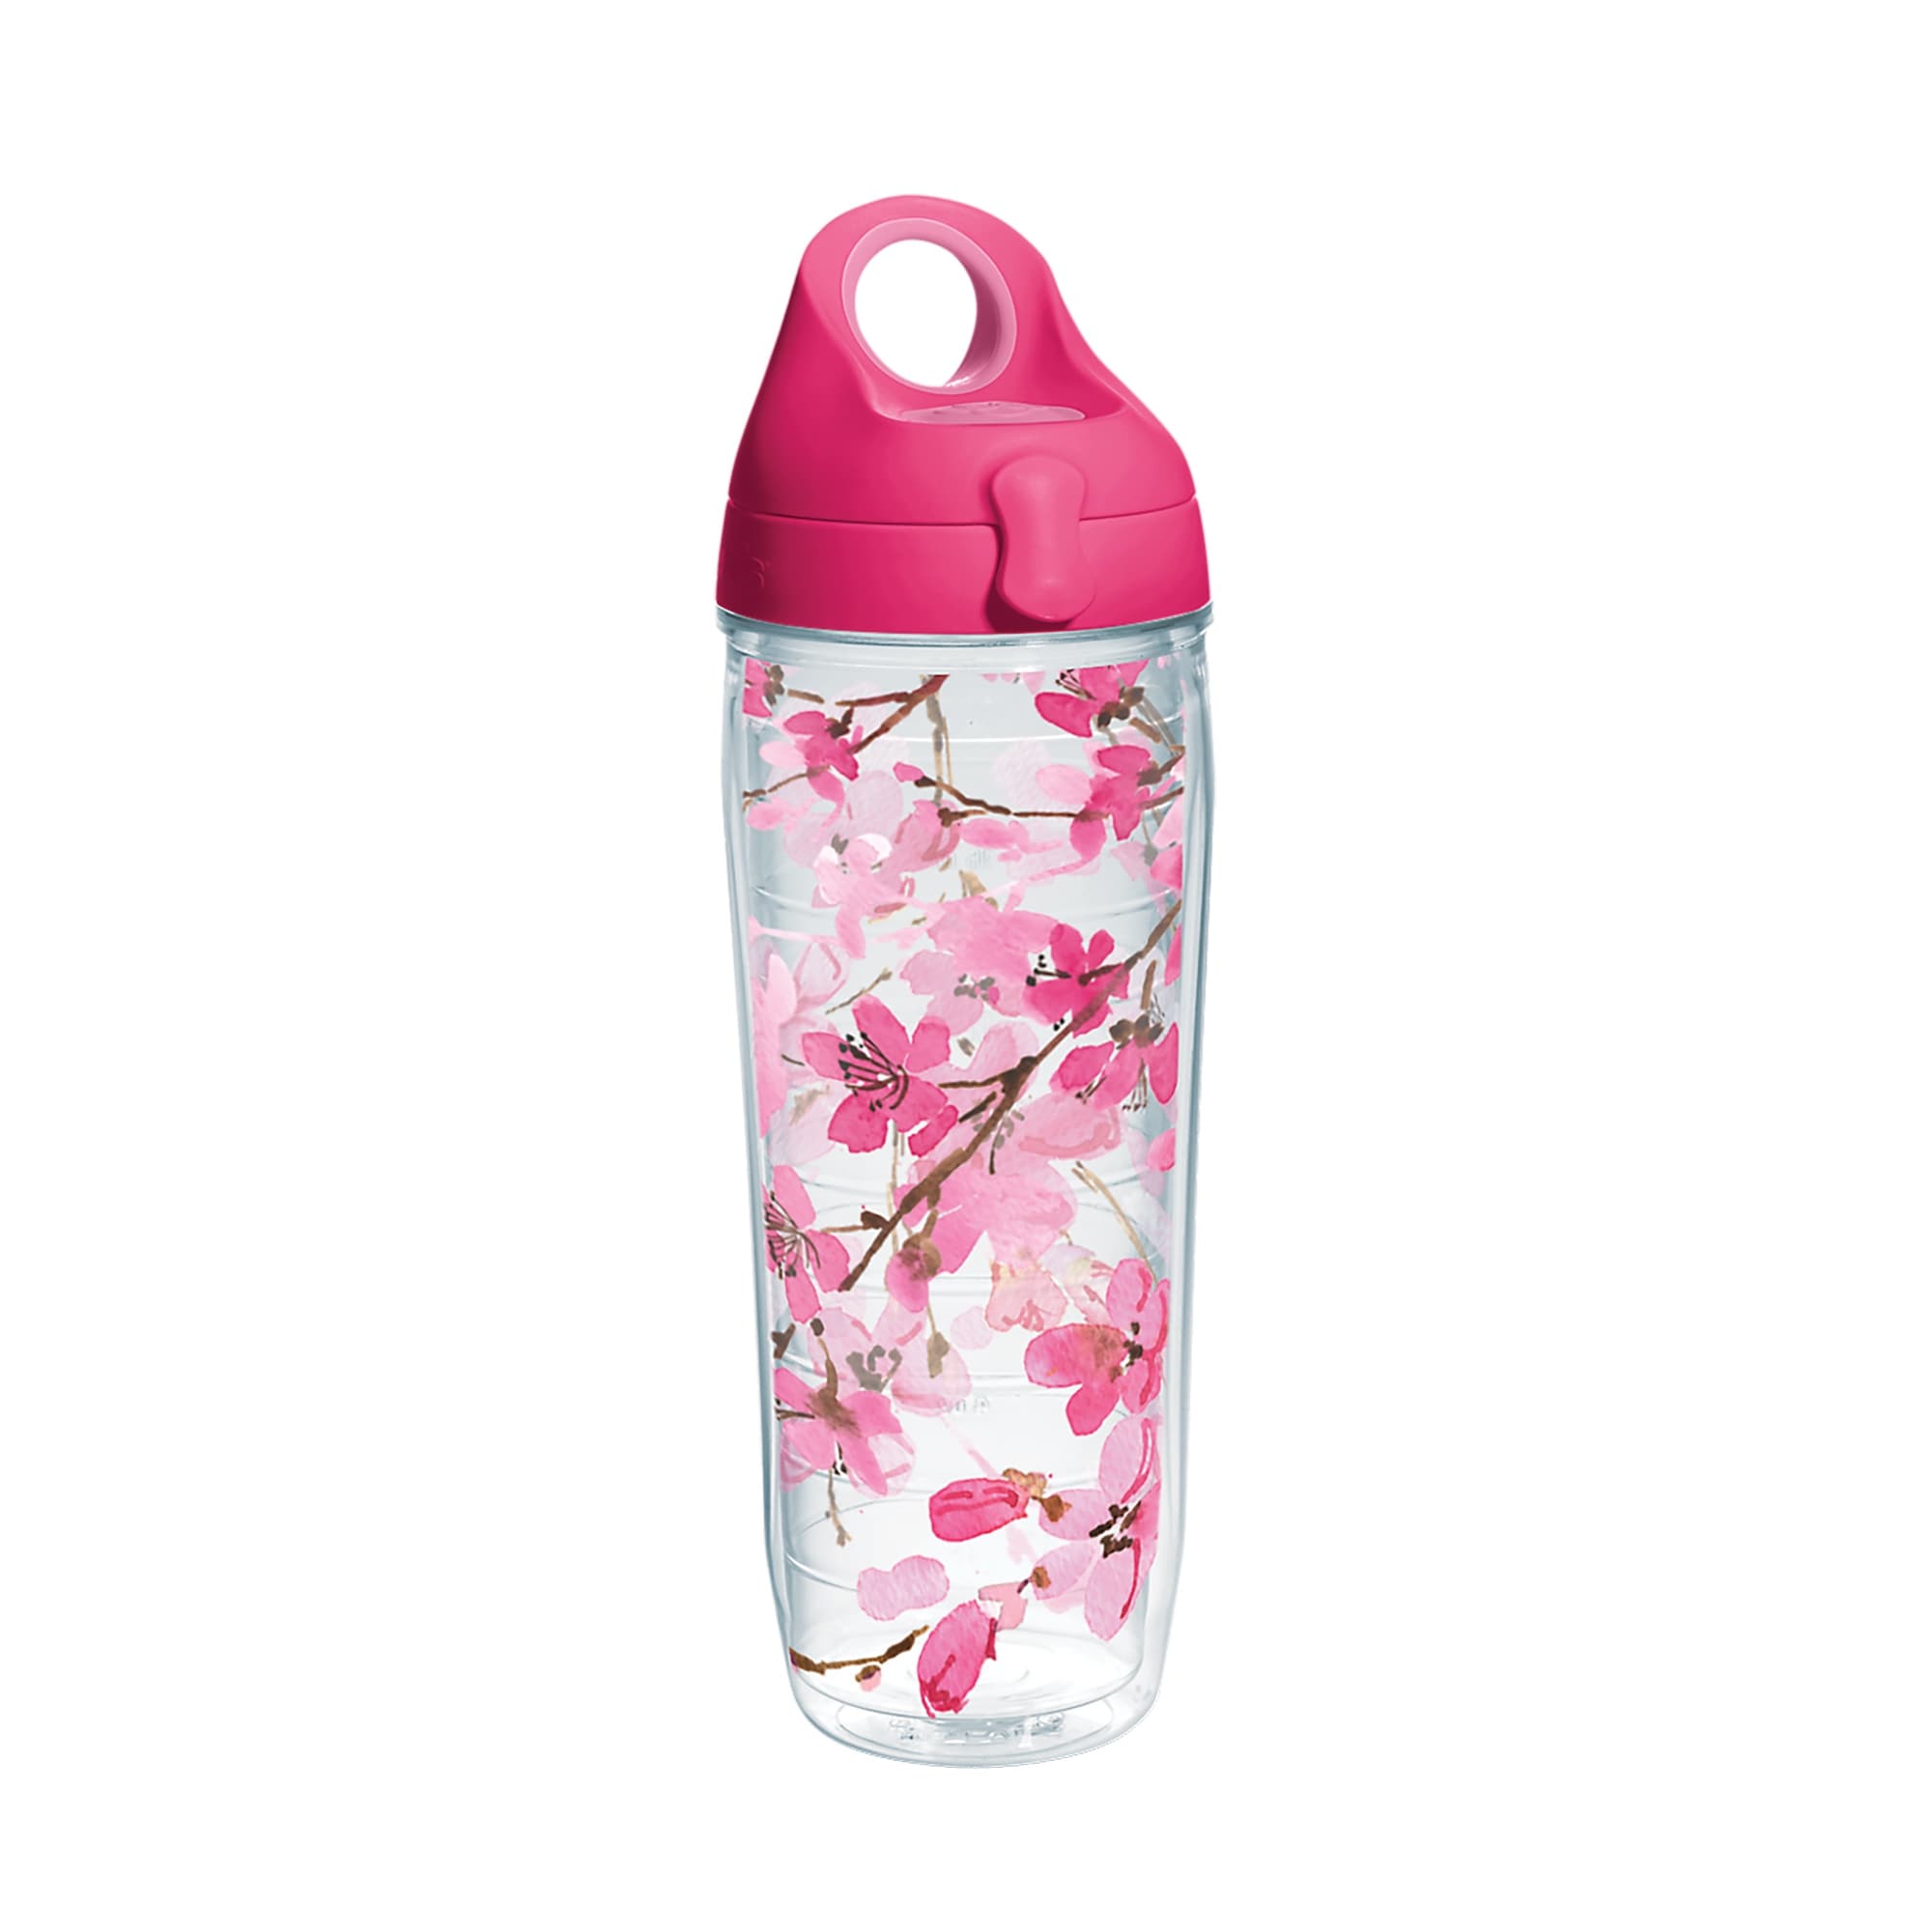 https://ak1.ostkcdn.com/images/products/is/images/direct/5a55cf0280cc8c390f231e06a1eab06b029c9b7b/Japanese-Cherry-Blossom-24-oz-Water-Bottle-with-lid.jpg